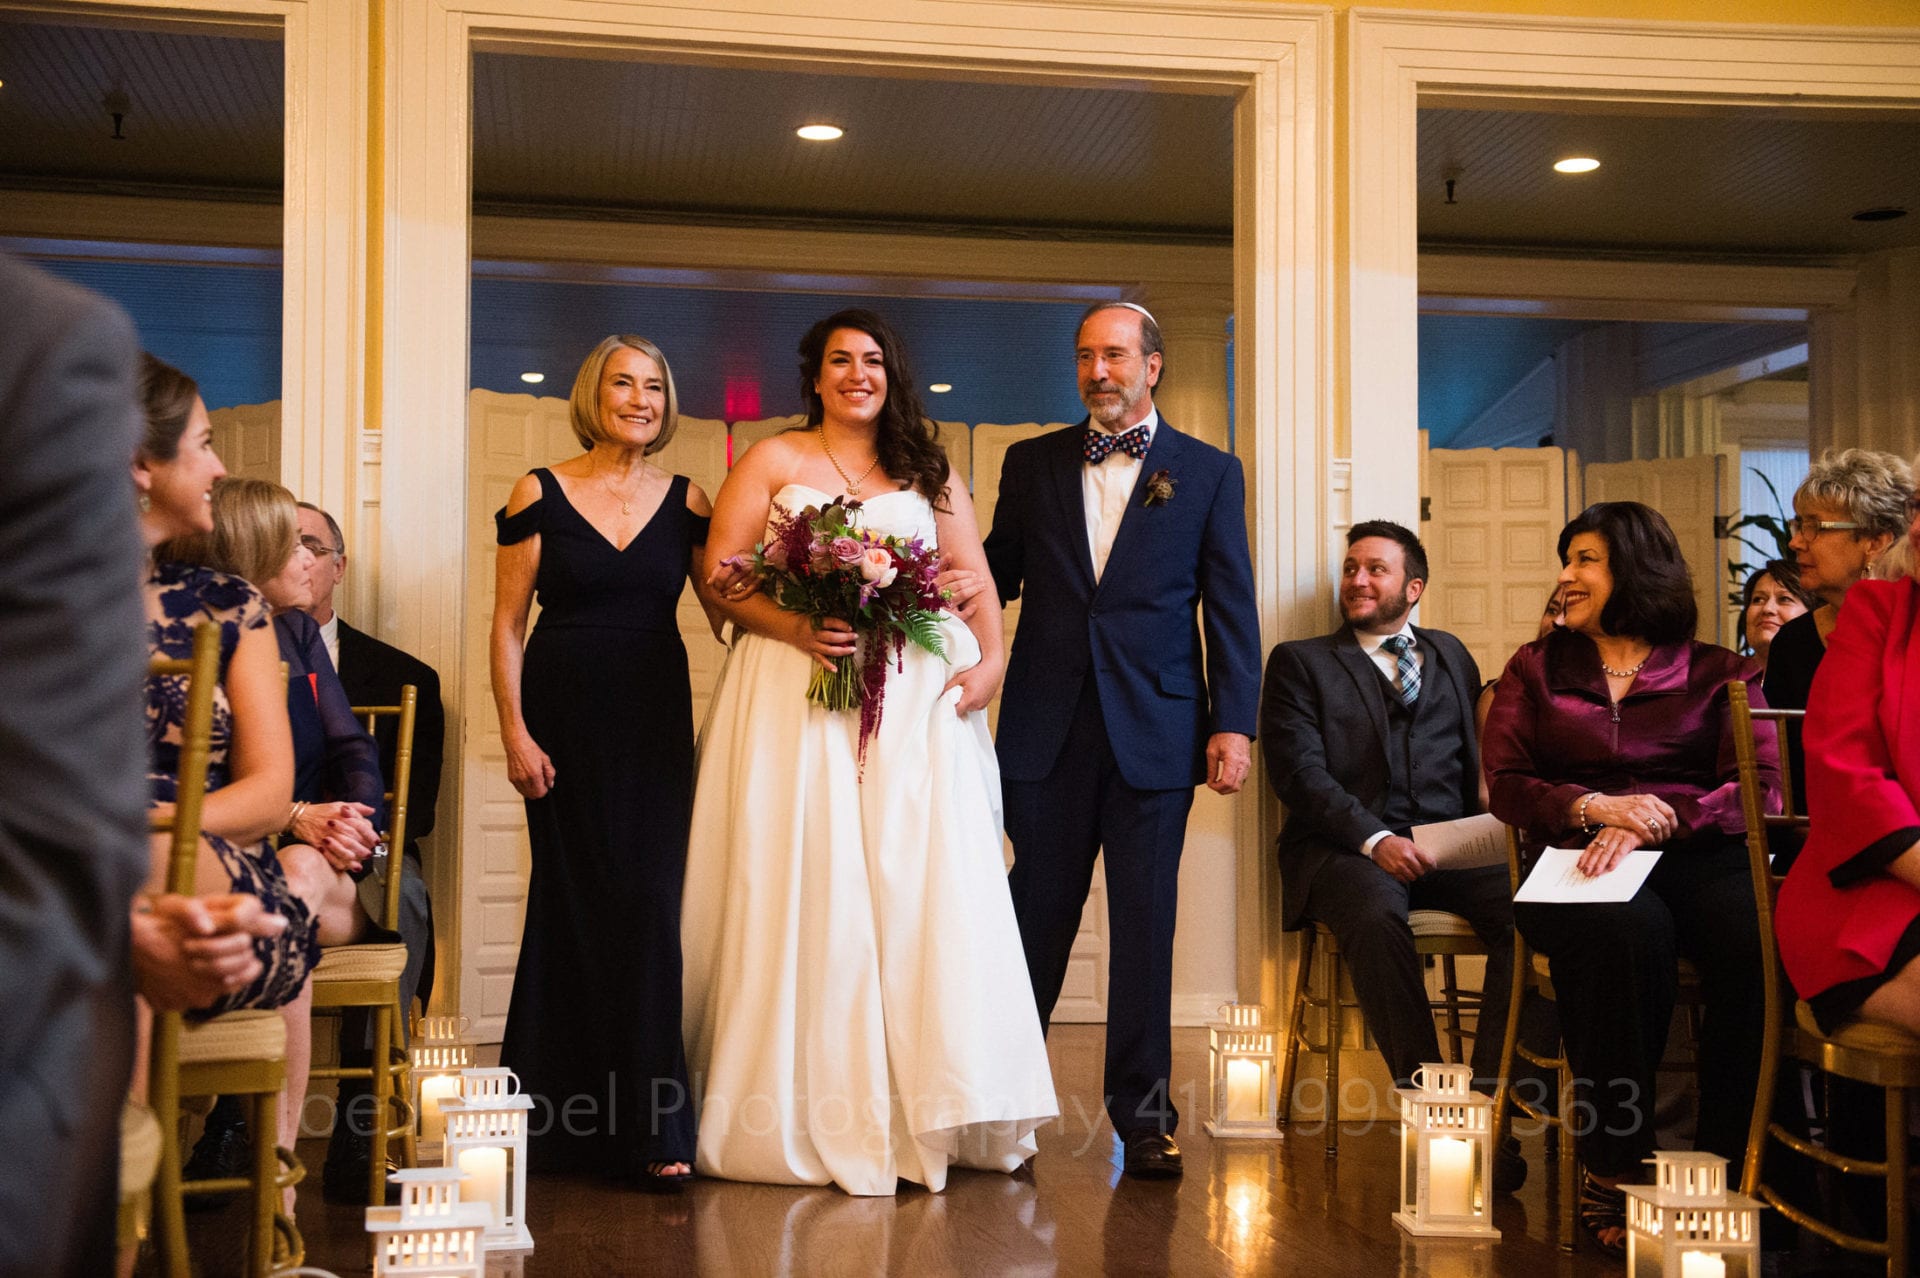 guests smile as a brides parents walk her down the aisle